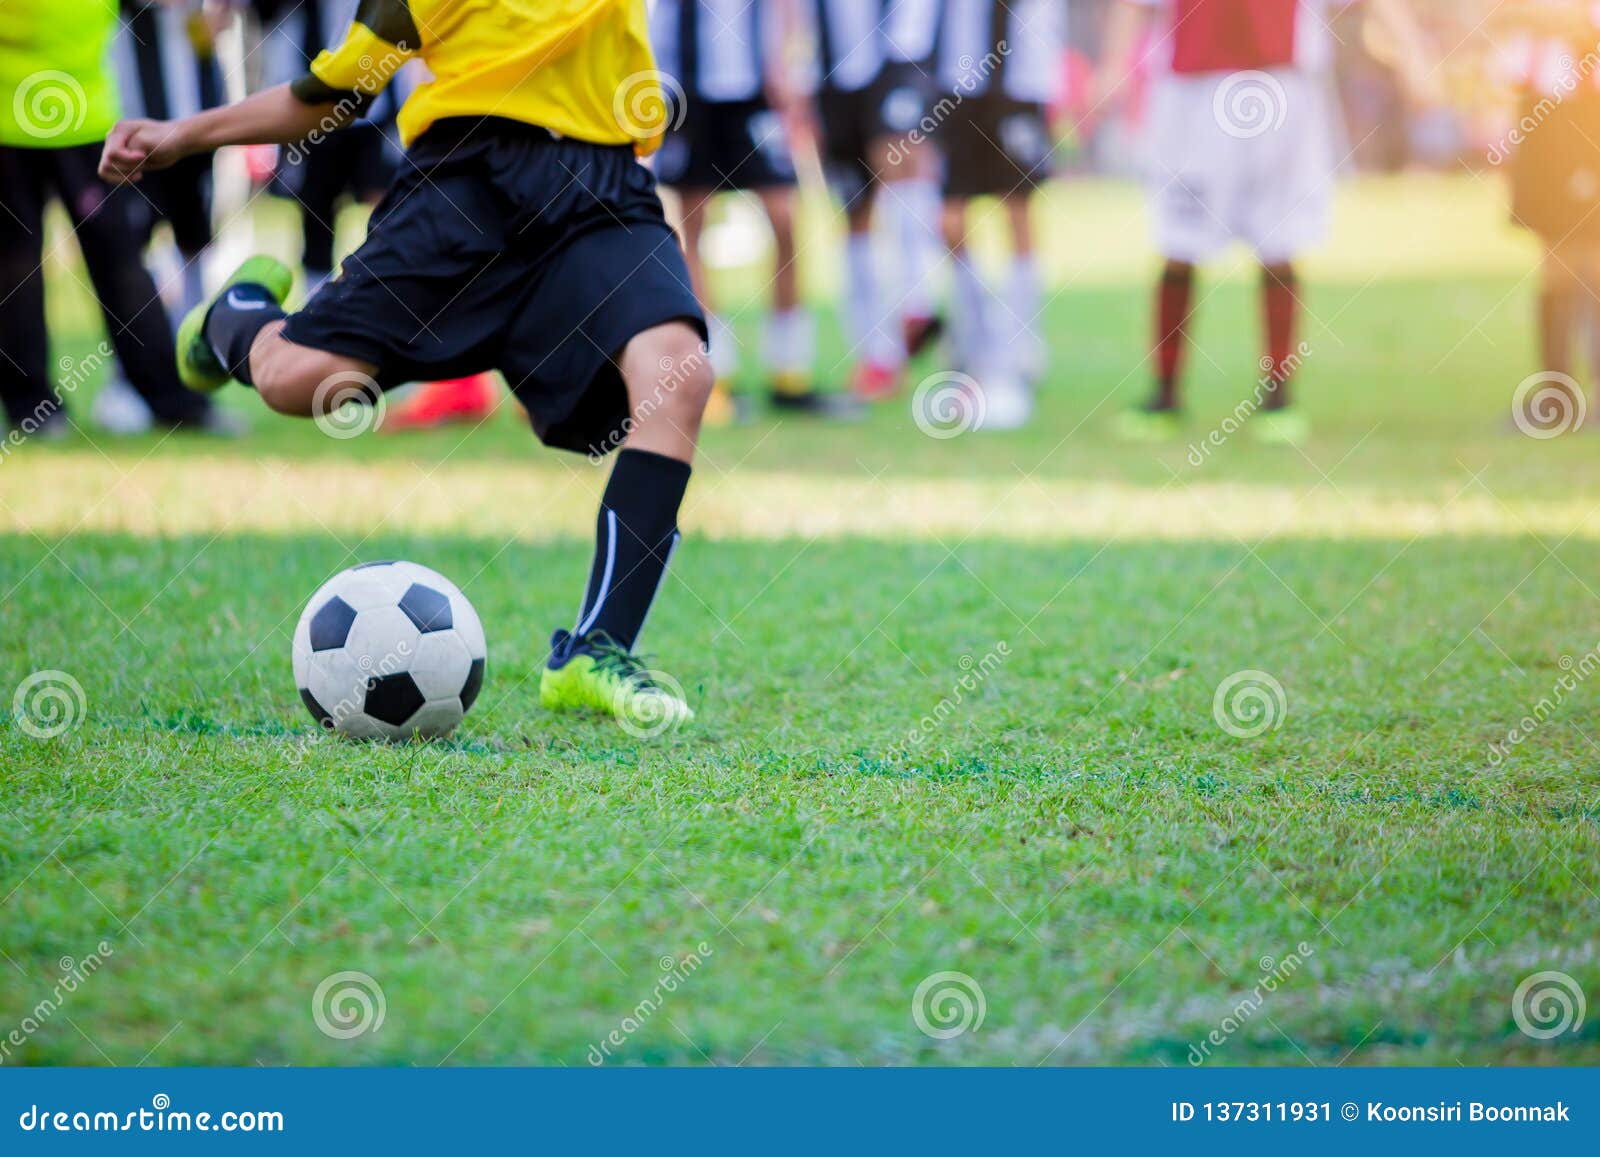 Kid Soccer Player Do Penalty Shootout Stock Image Image of equipment